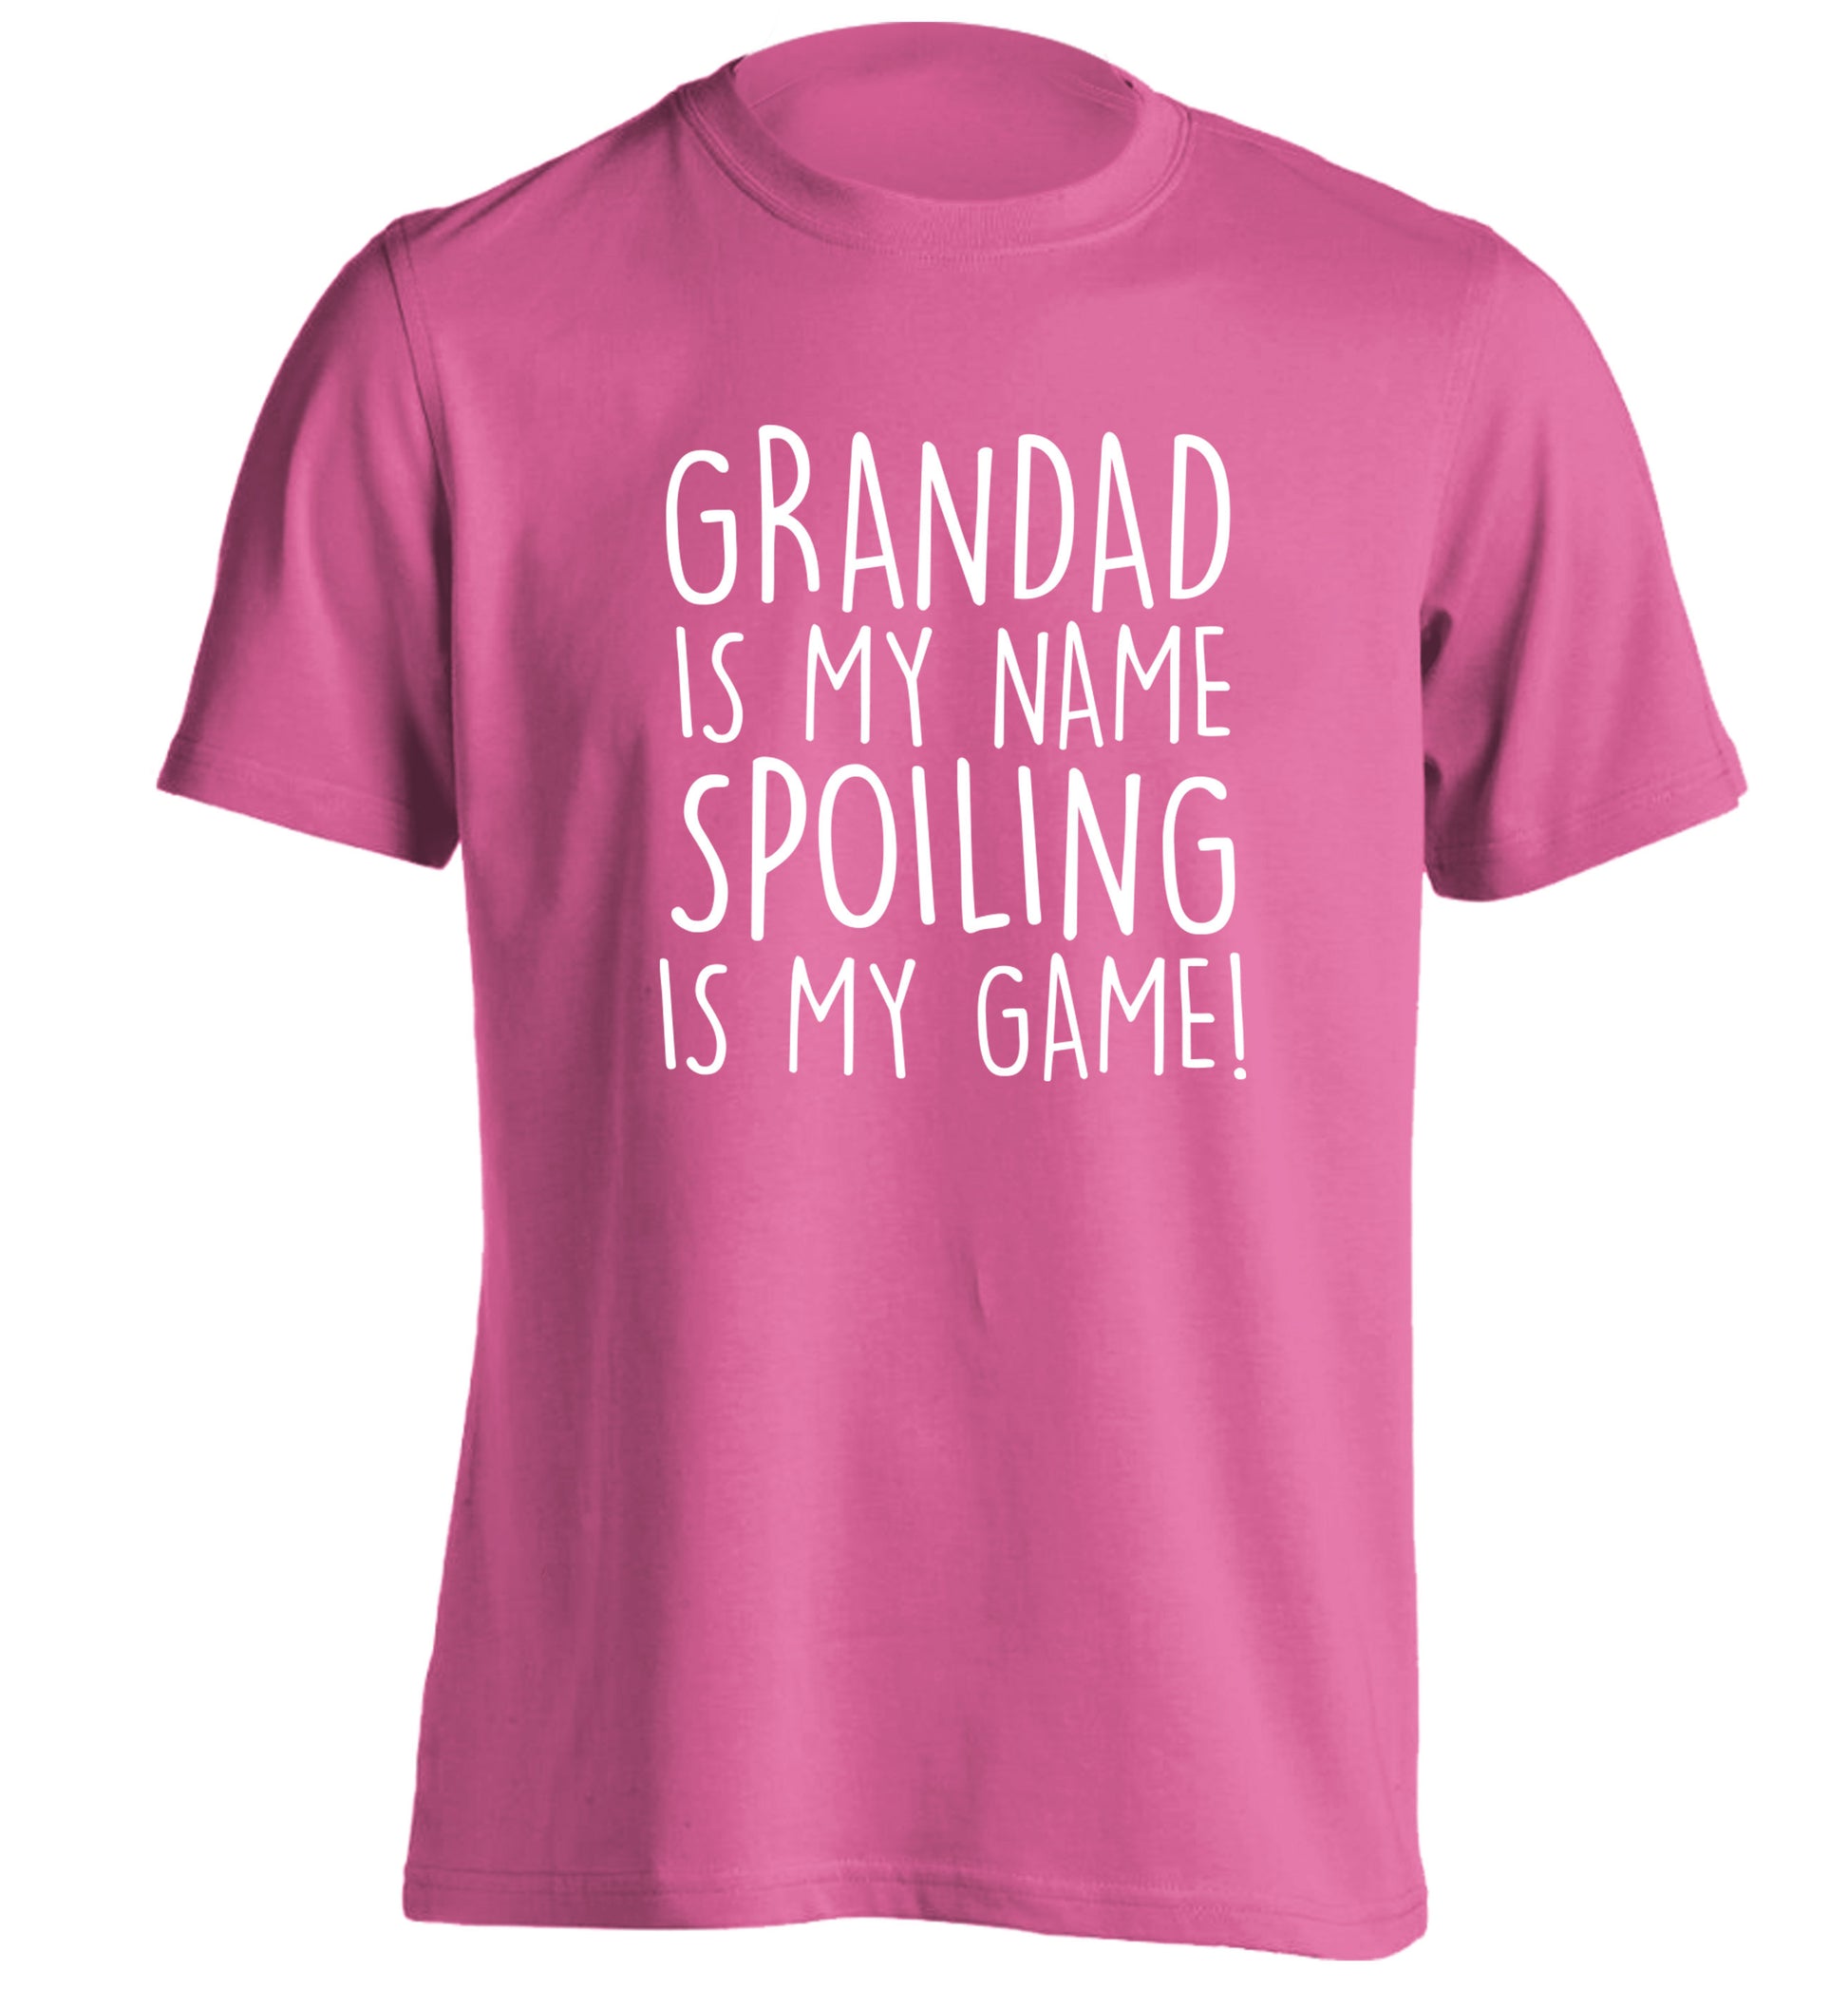 Grandad is my name, spoiling is my game adults unisex pink Tshirt 2XL